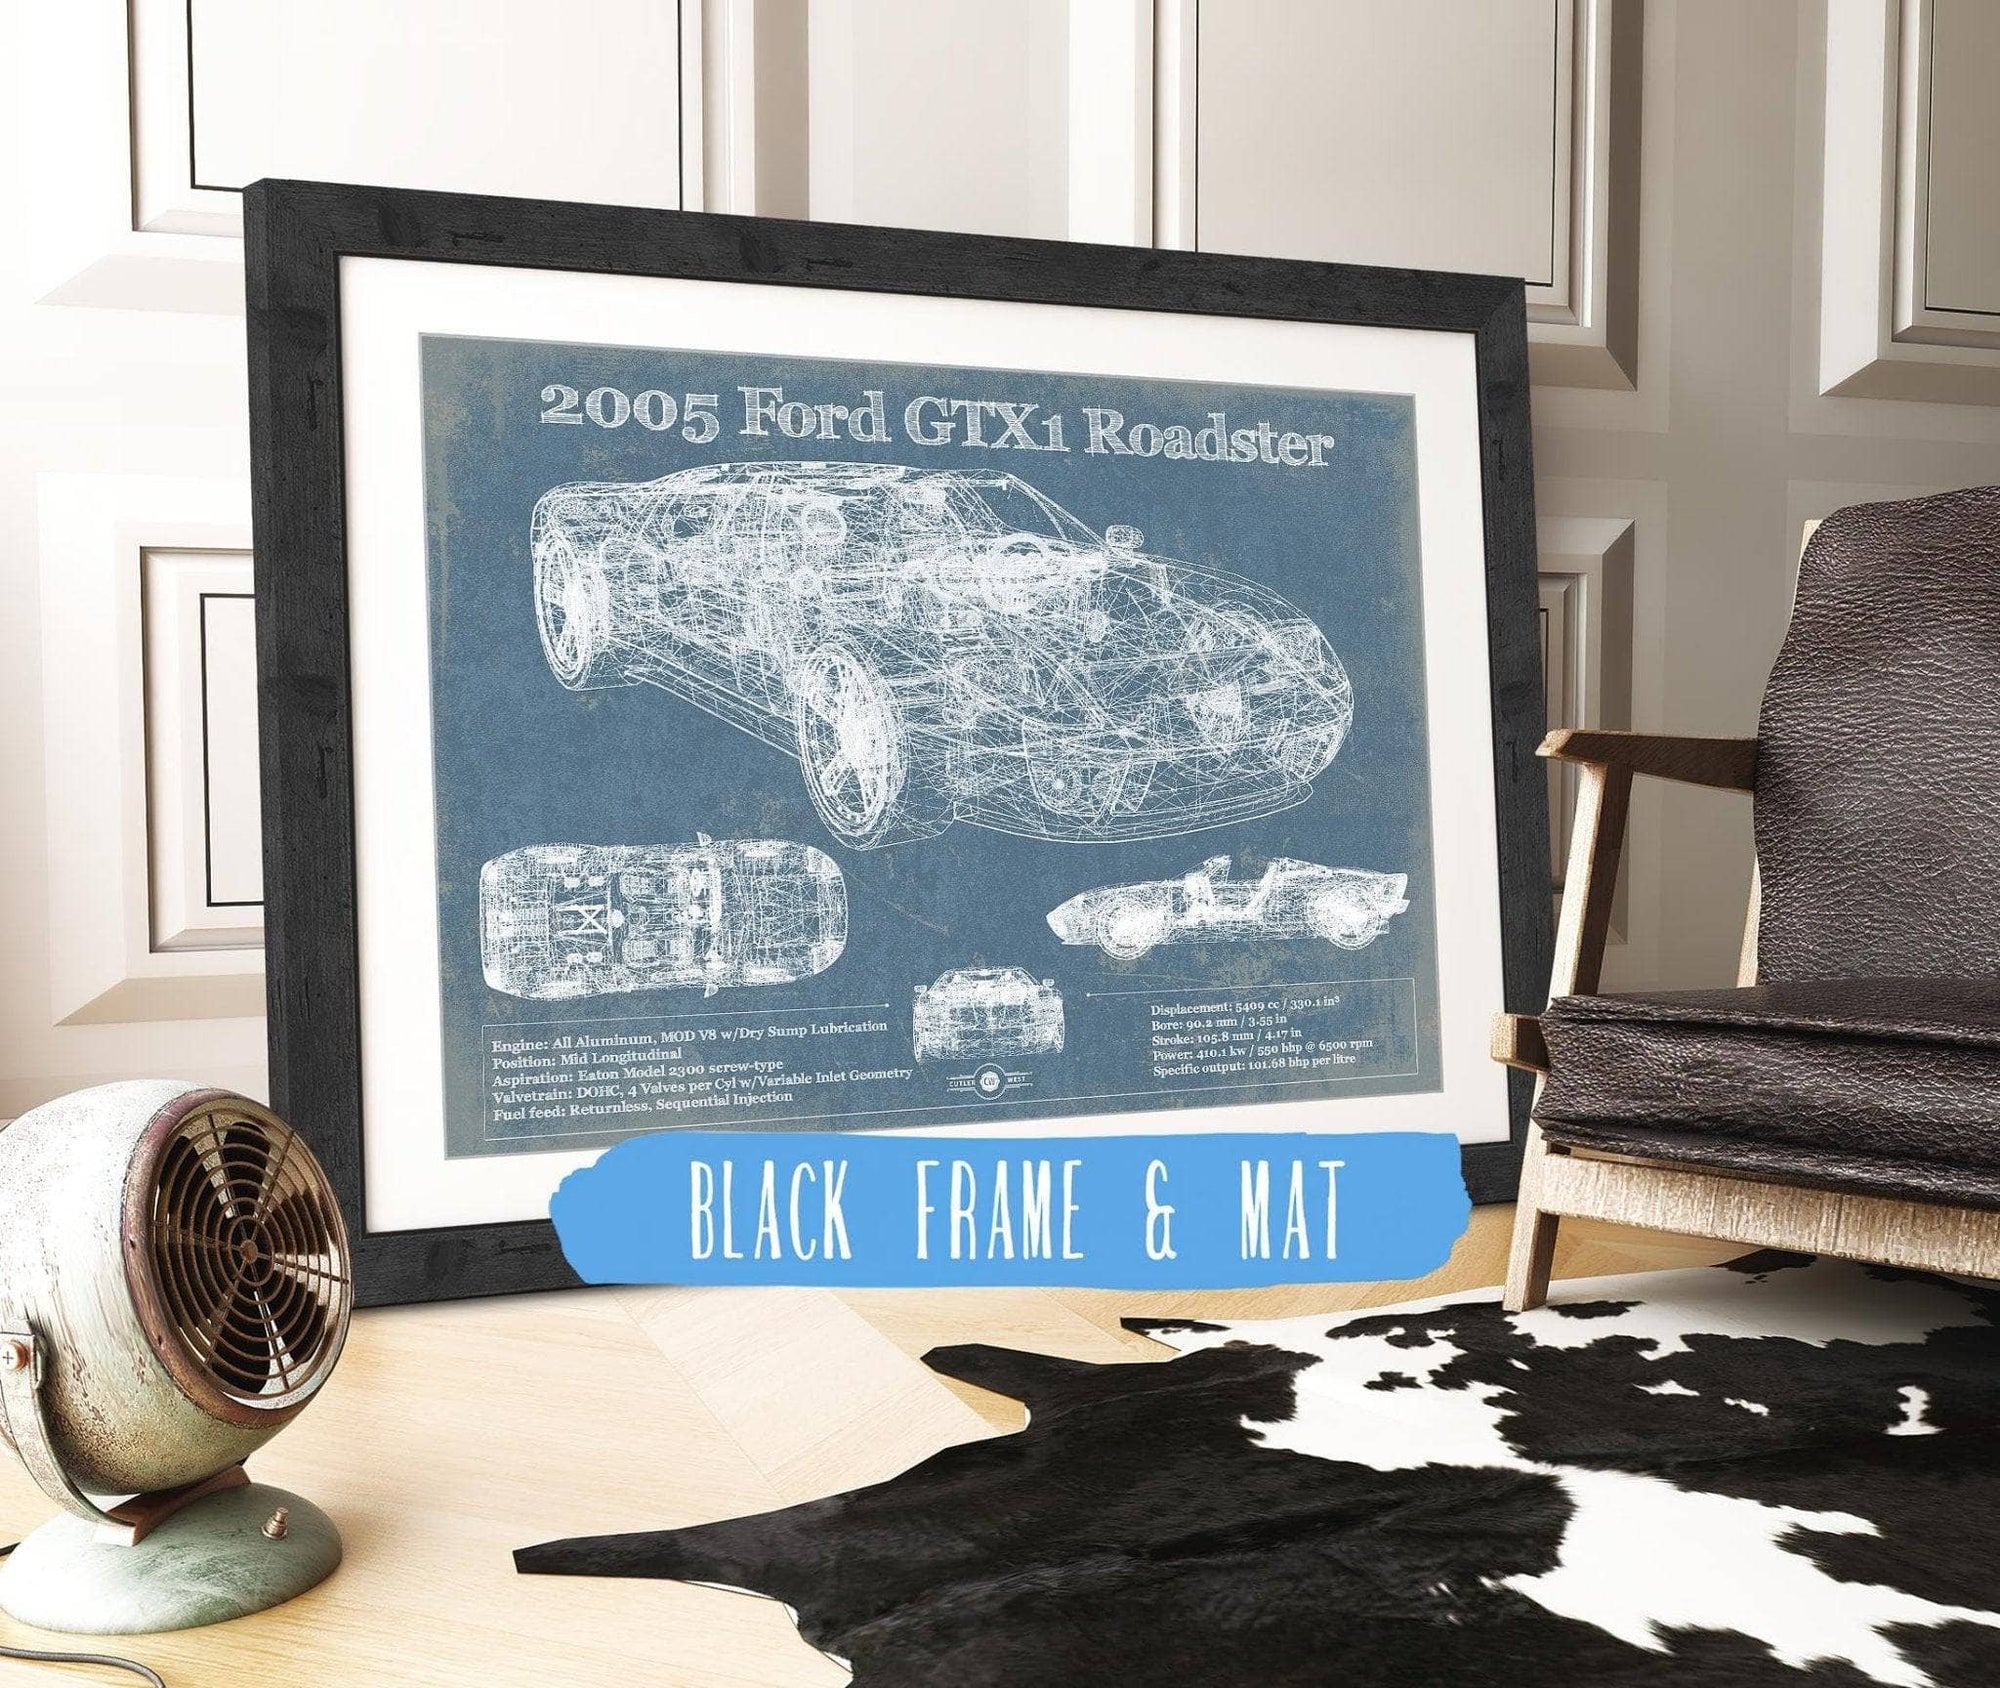 Cutler West Ford Collection 14" x 11" / Black Frame & Mat 2005 Ford GTX1 Roadster Vintage Blueprint Auto Print 933350037_17737